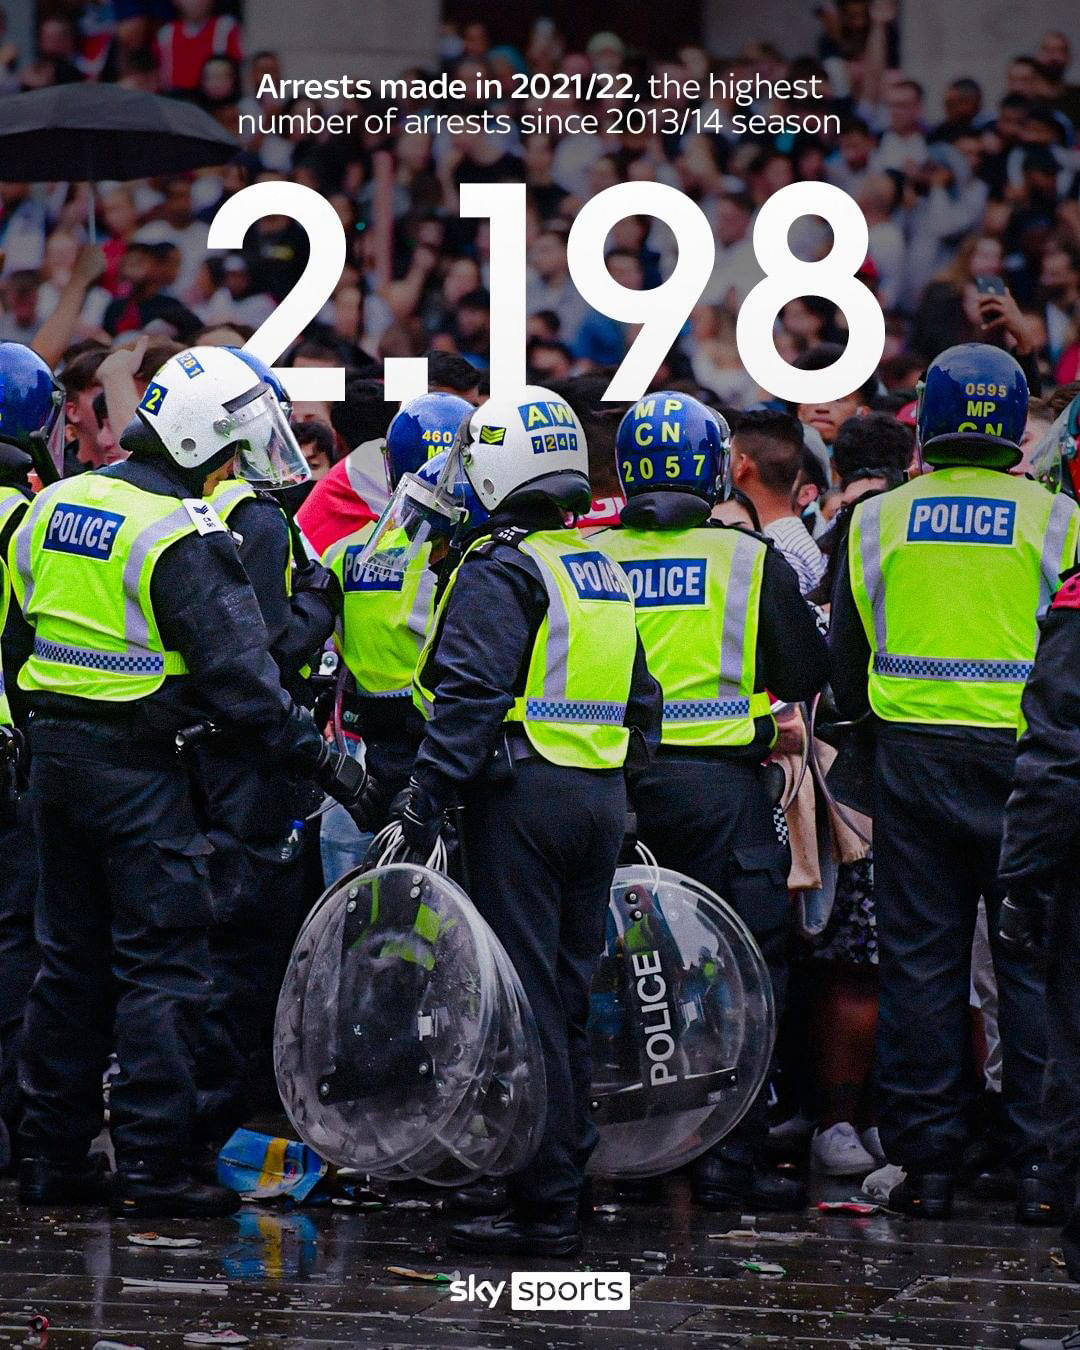 Sky Sports - Arrests at football matches in England and Wales are the highest in eight years, as the